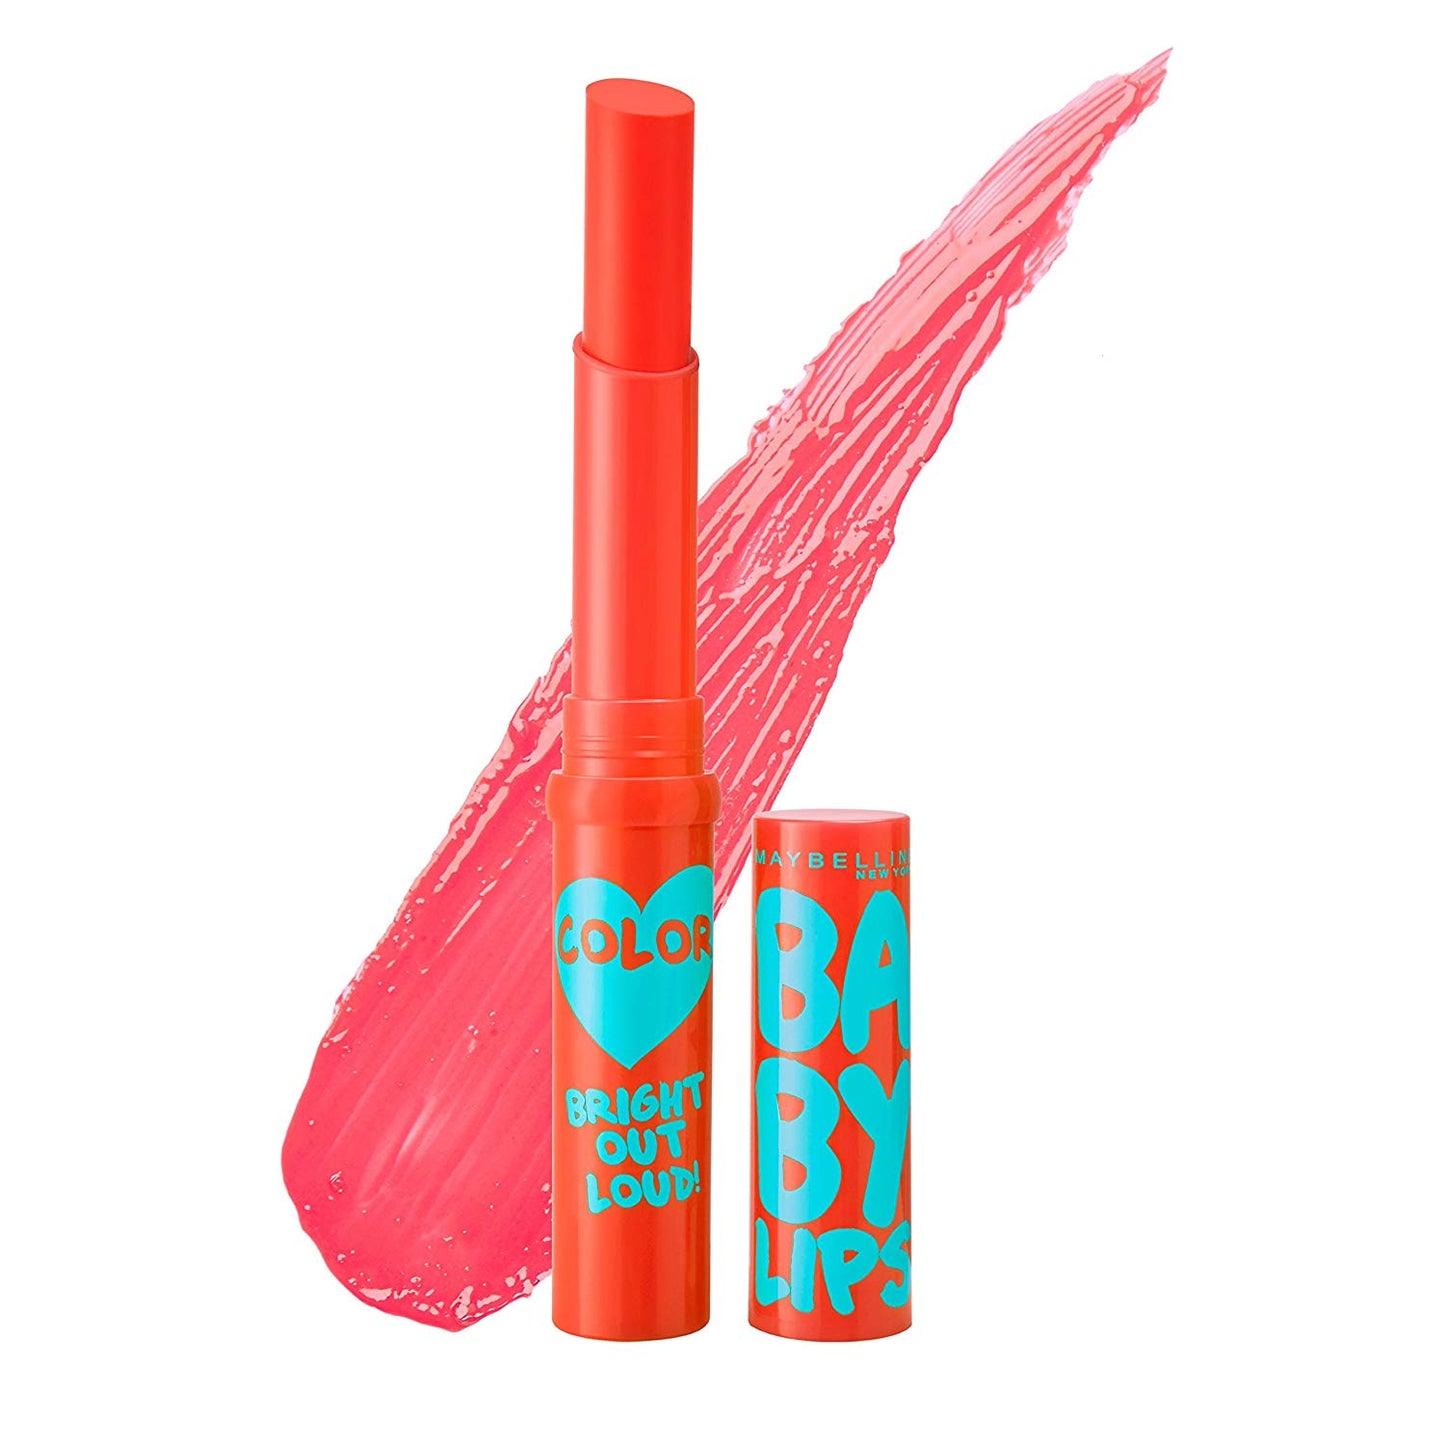 Maybelline Baby Lips Bright Out Loud Color Tinted Lip Balm SPF 13 Vivid Peach - Asian Beauty Supply